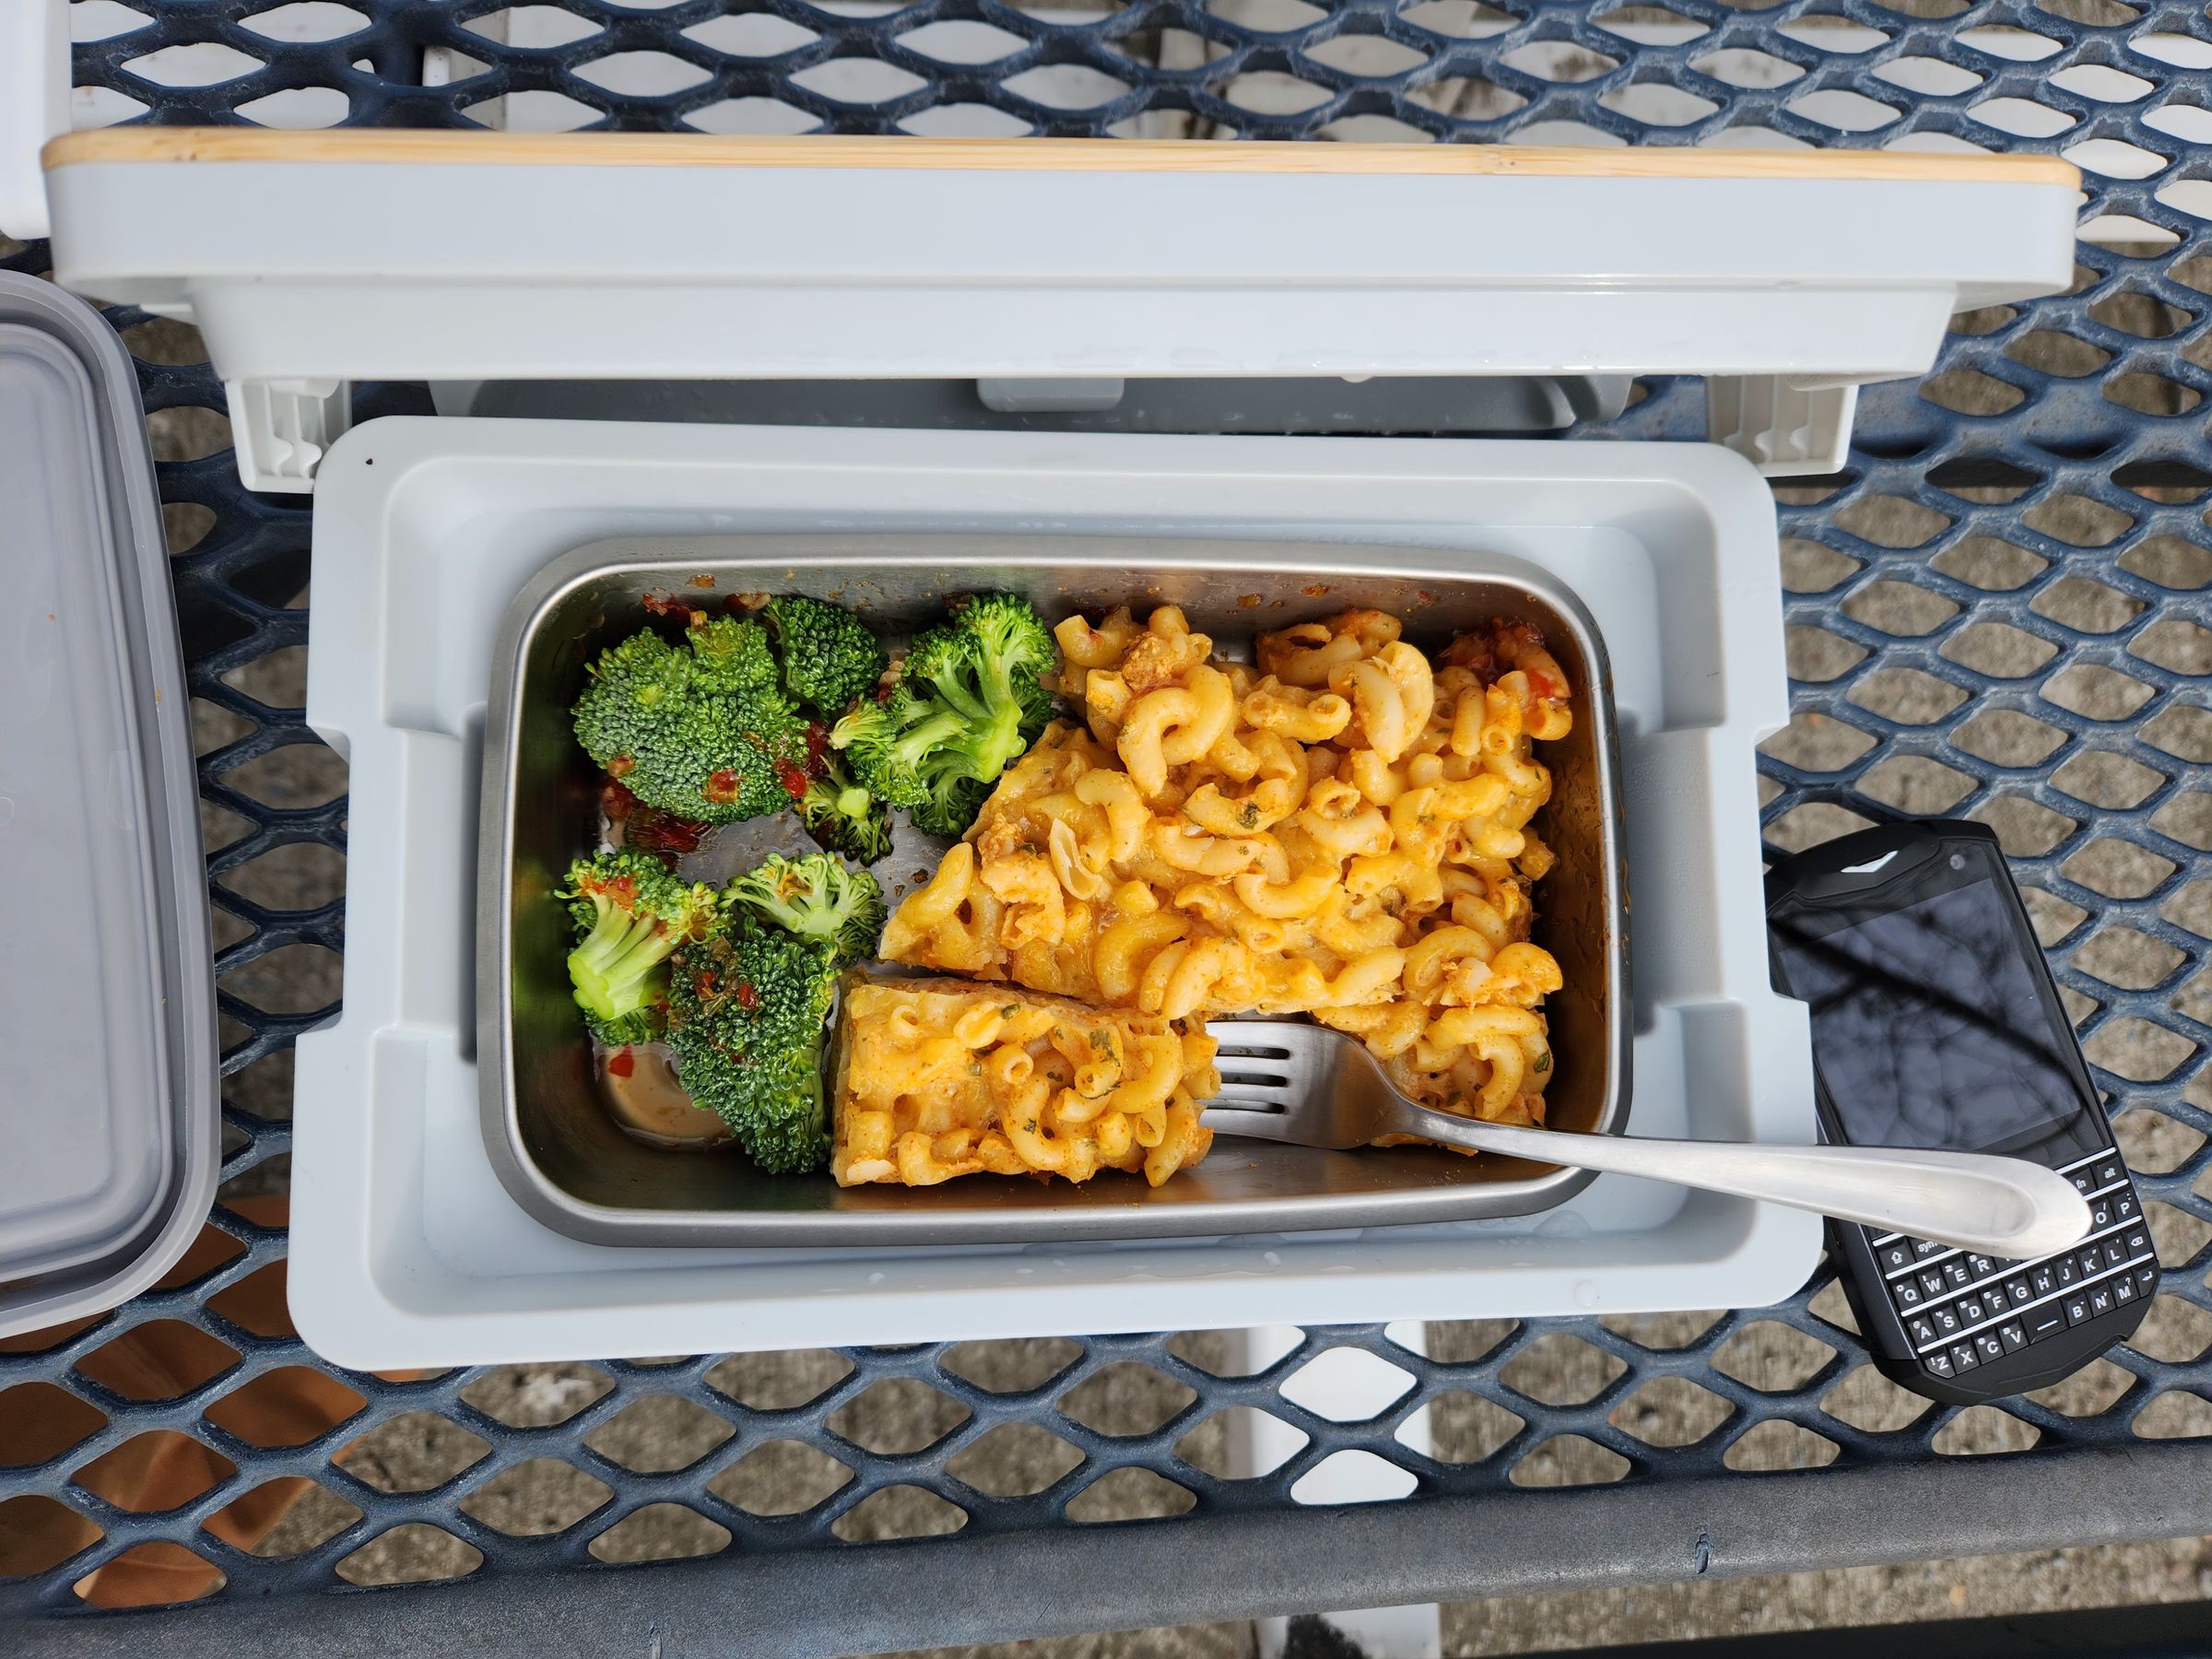 Photo of the Steambox on a picnic table with mac and cheese and broccoli in it.